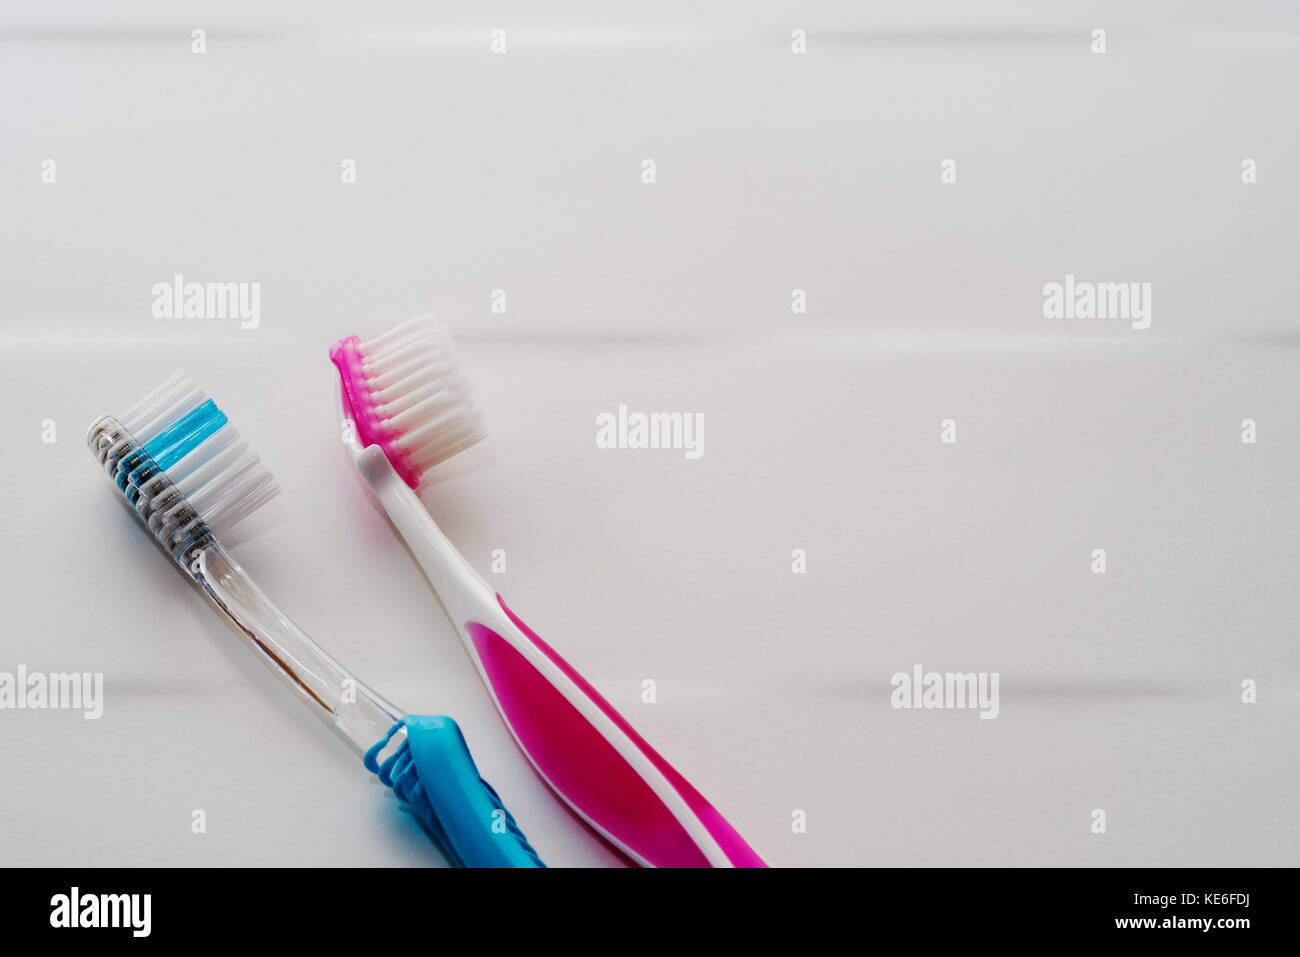 His and hers pink and blue toothbrushes. Stock Photo